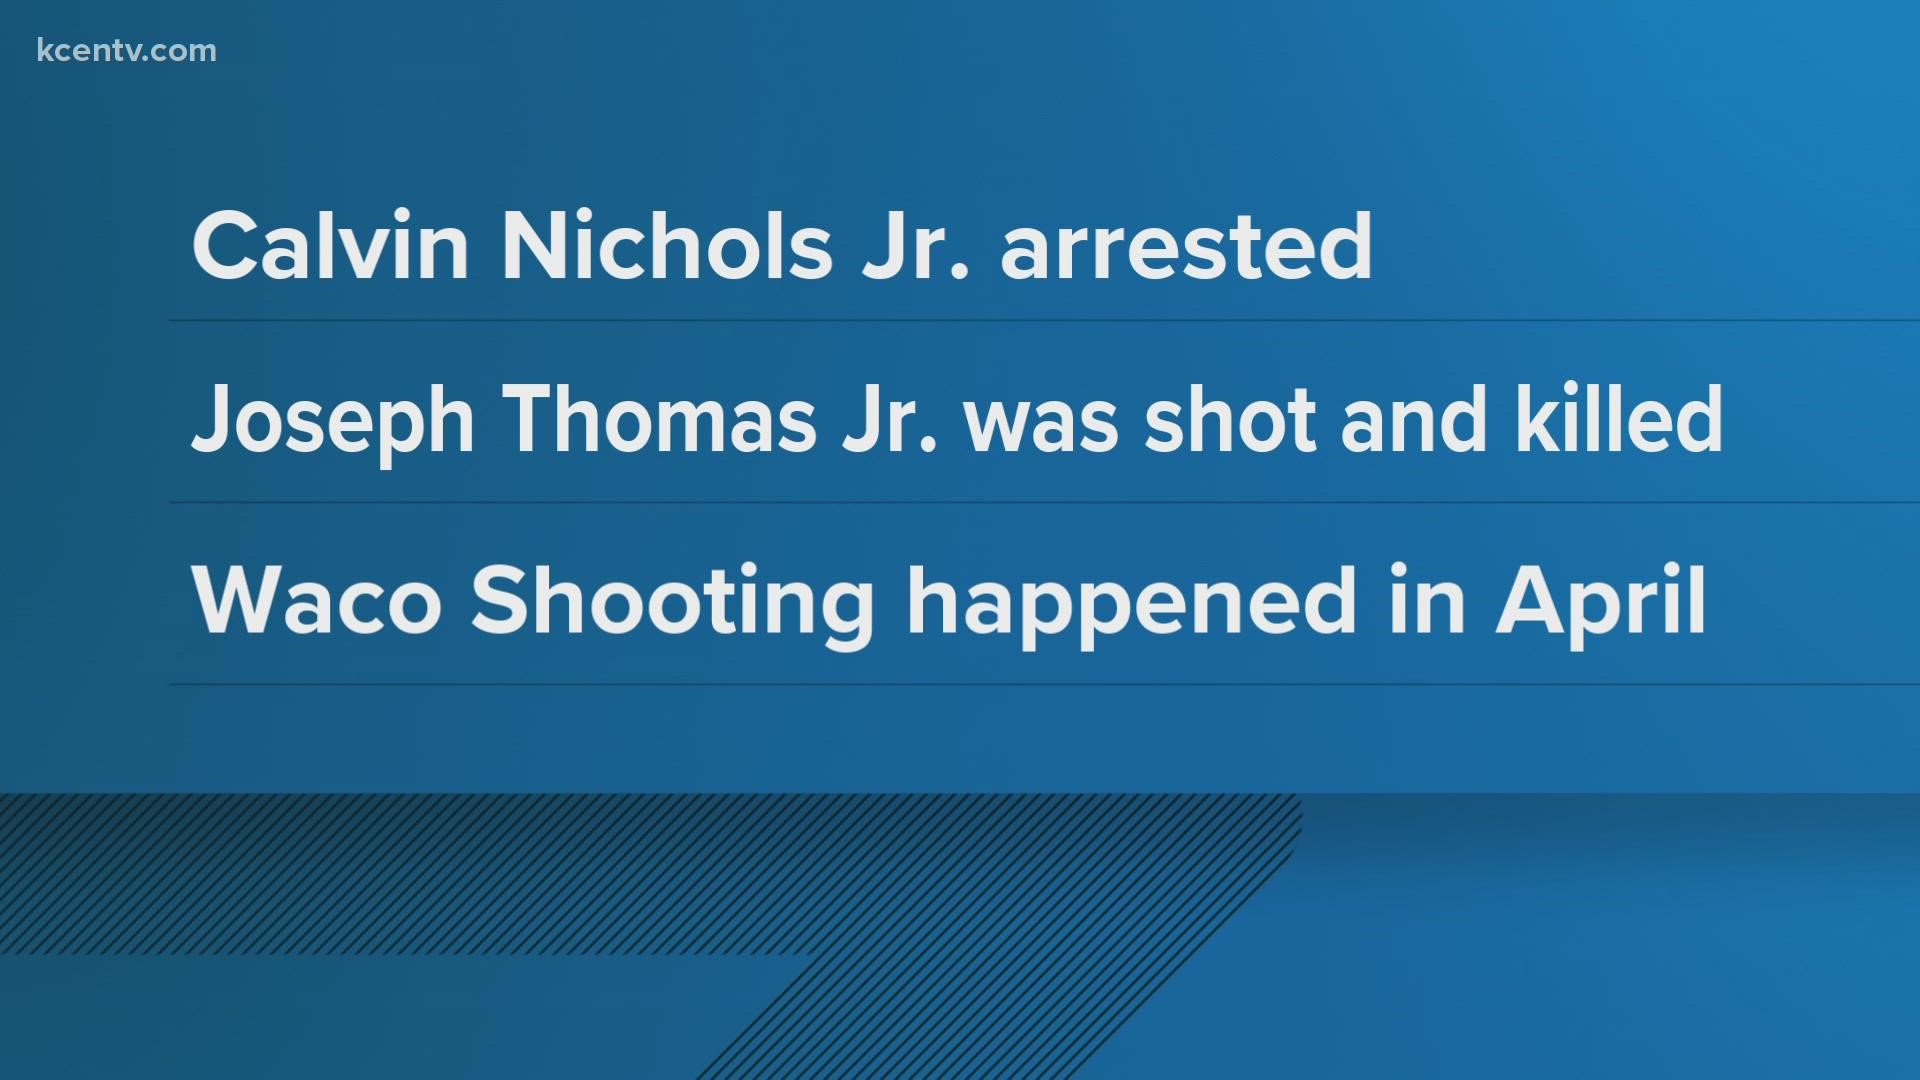 Calvin Nichols Jr. will now be transported to McLennan County Jail, as stated by Waco PD.